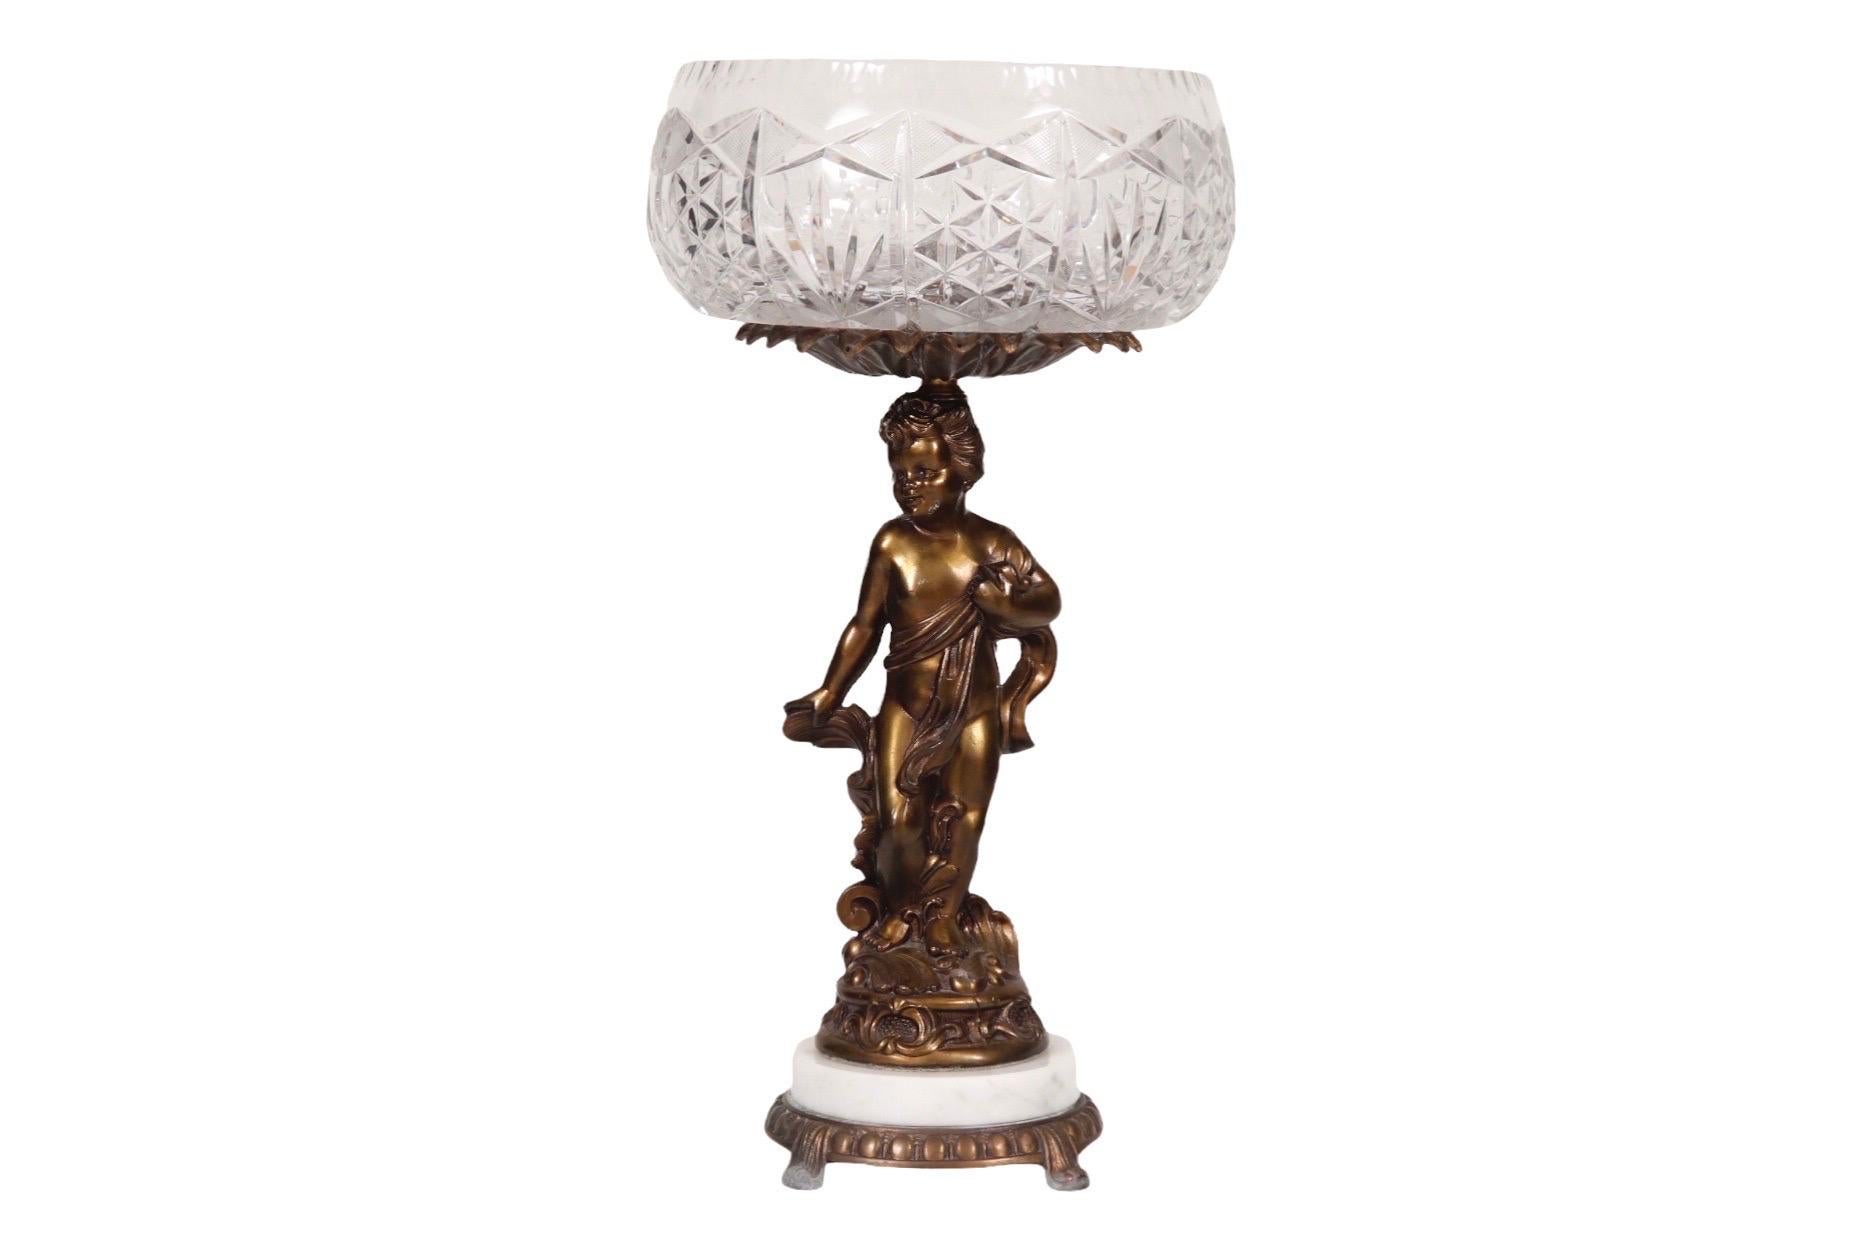 A large figural centerpiece compotier. A cut glass bowl with a sawtooth edged rim and faceted pattern is supported by a bronze plated cast cherub. On the cherub's head is a bronze bobeche in the shape of fanned feathers. The base consists of round